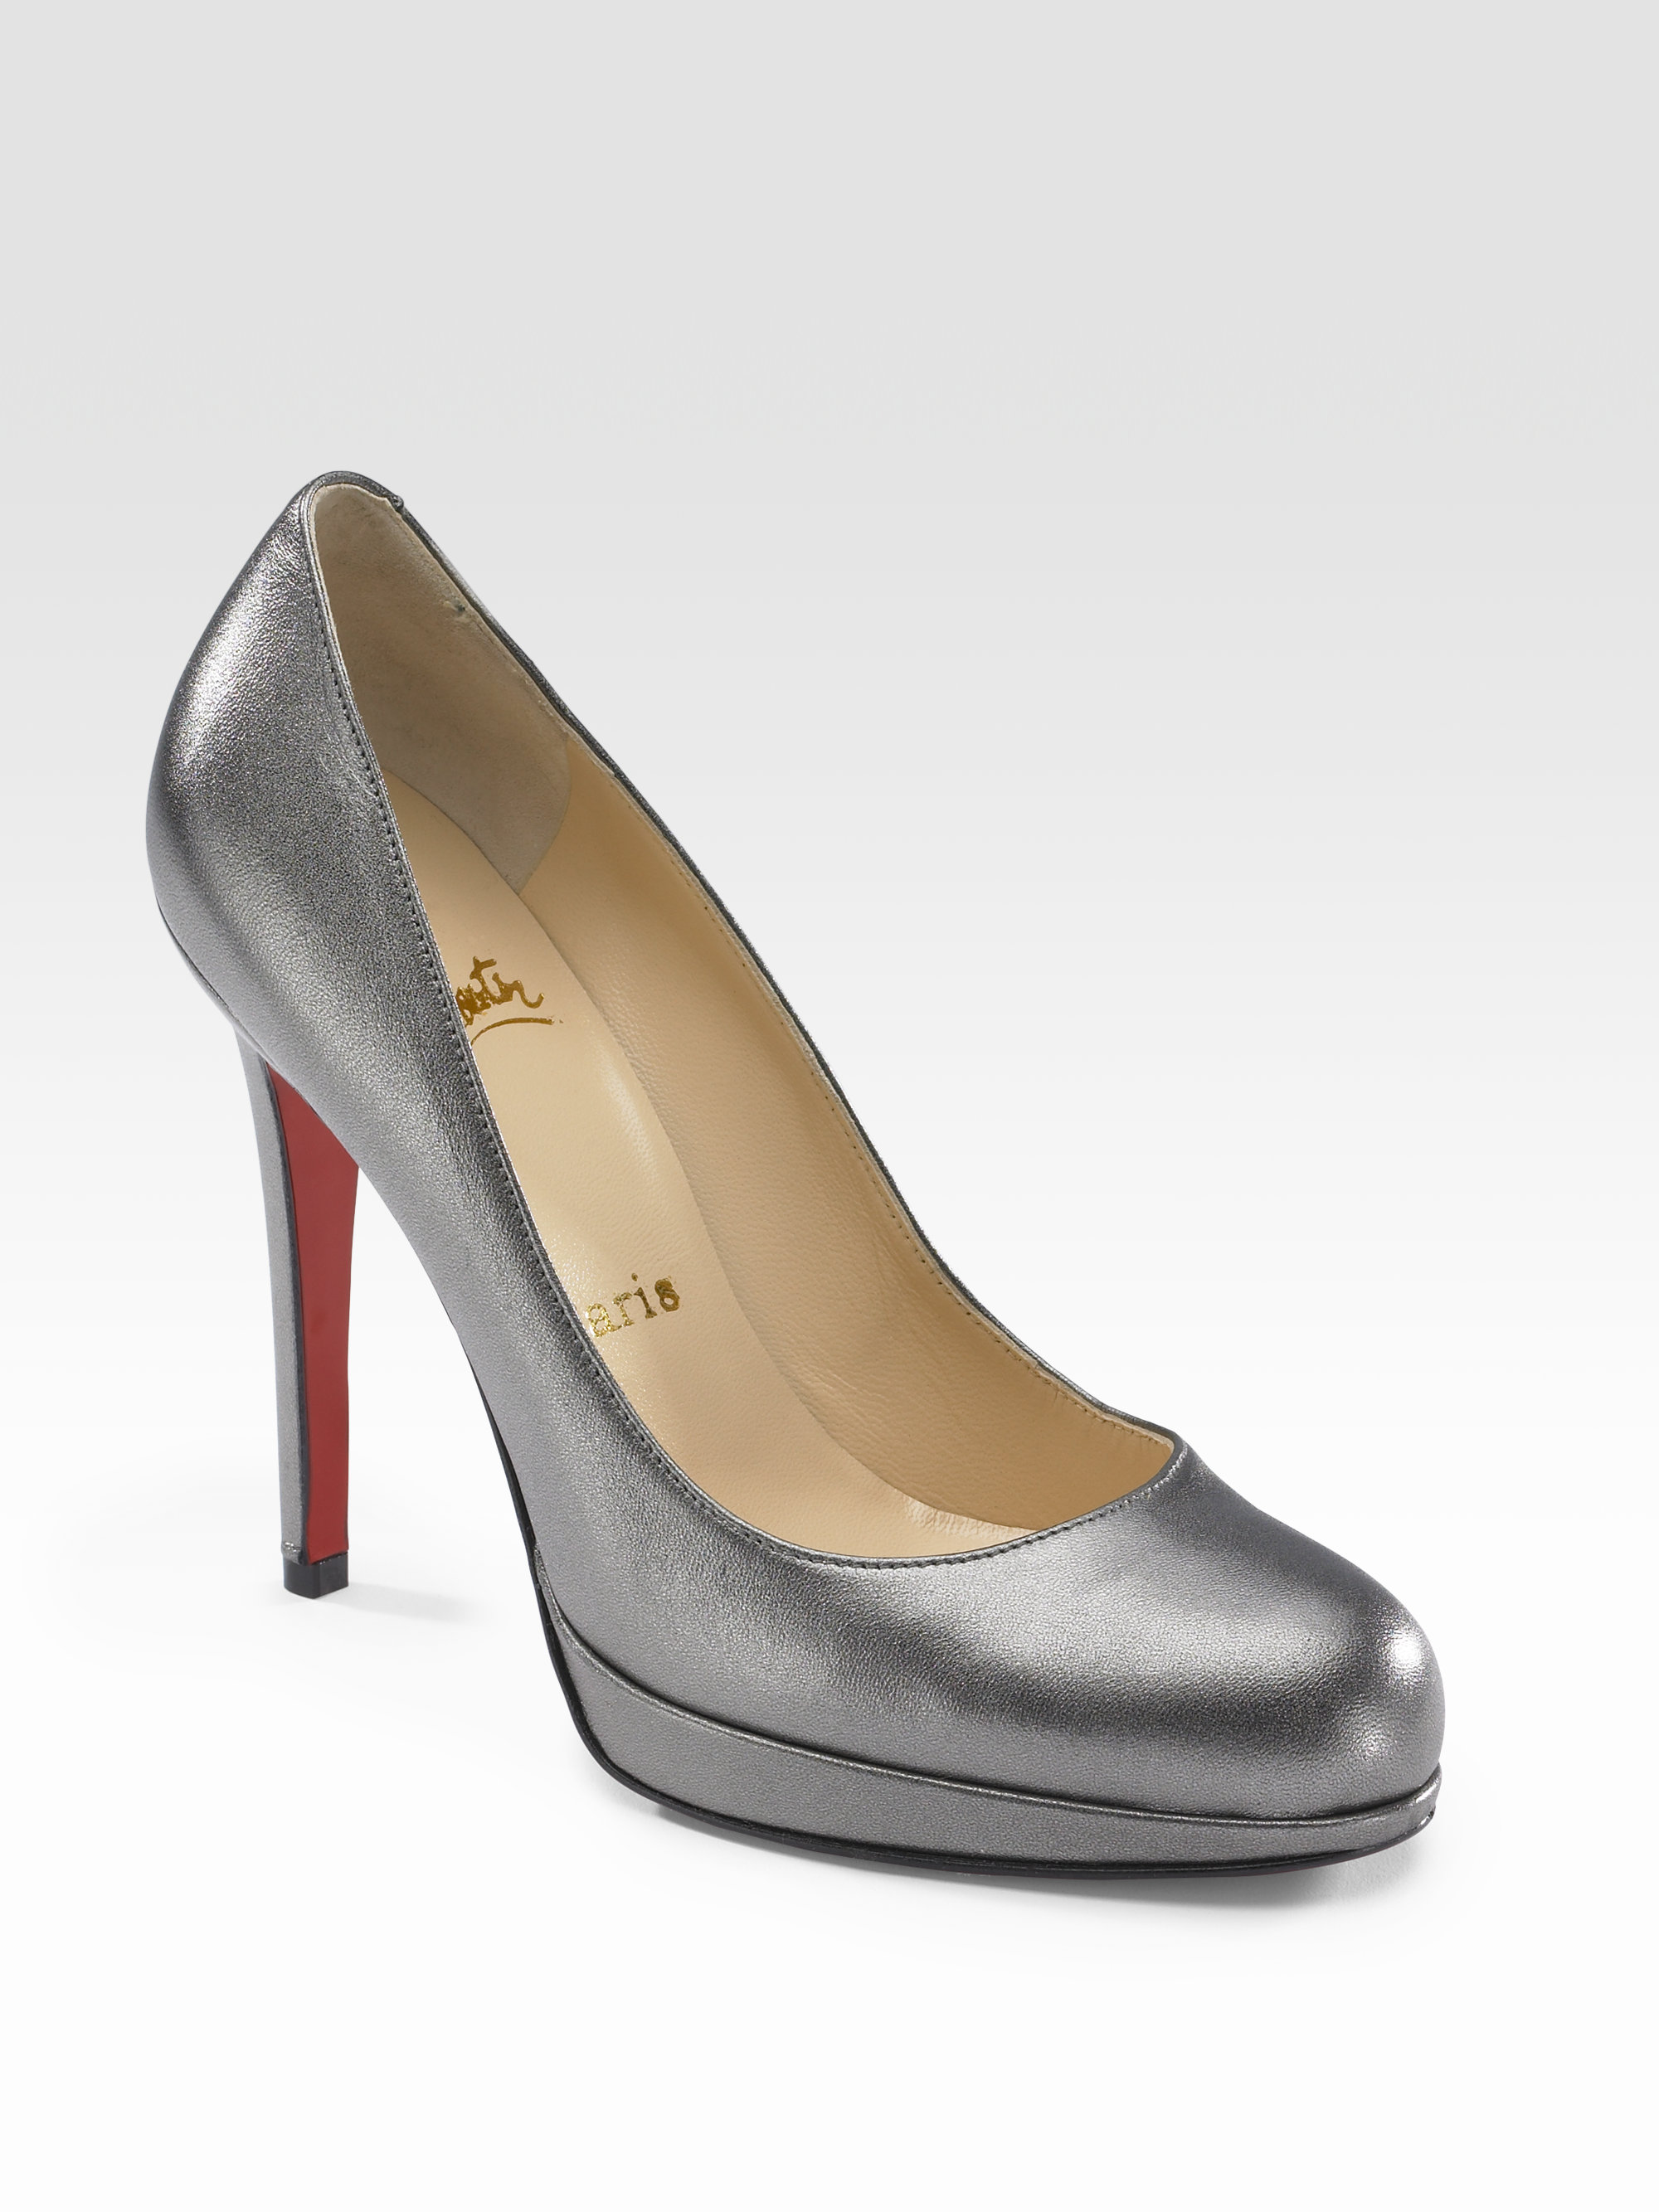 Christian louboutin New Simple Pumps in Gray (pewter) | Lyst